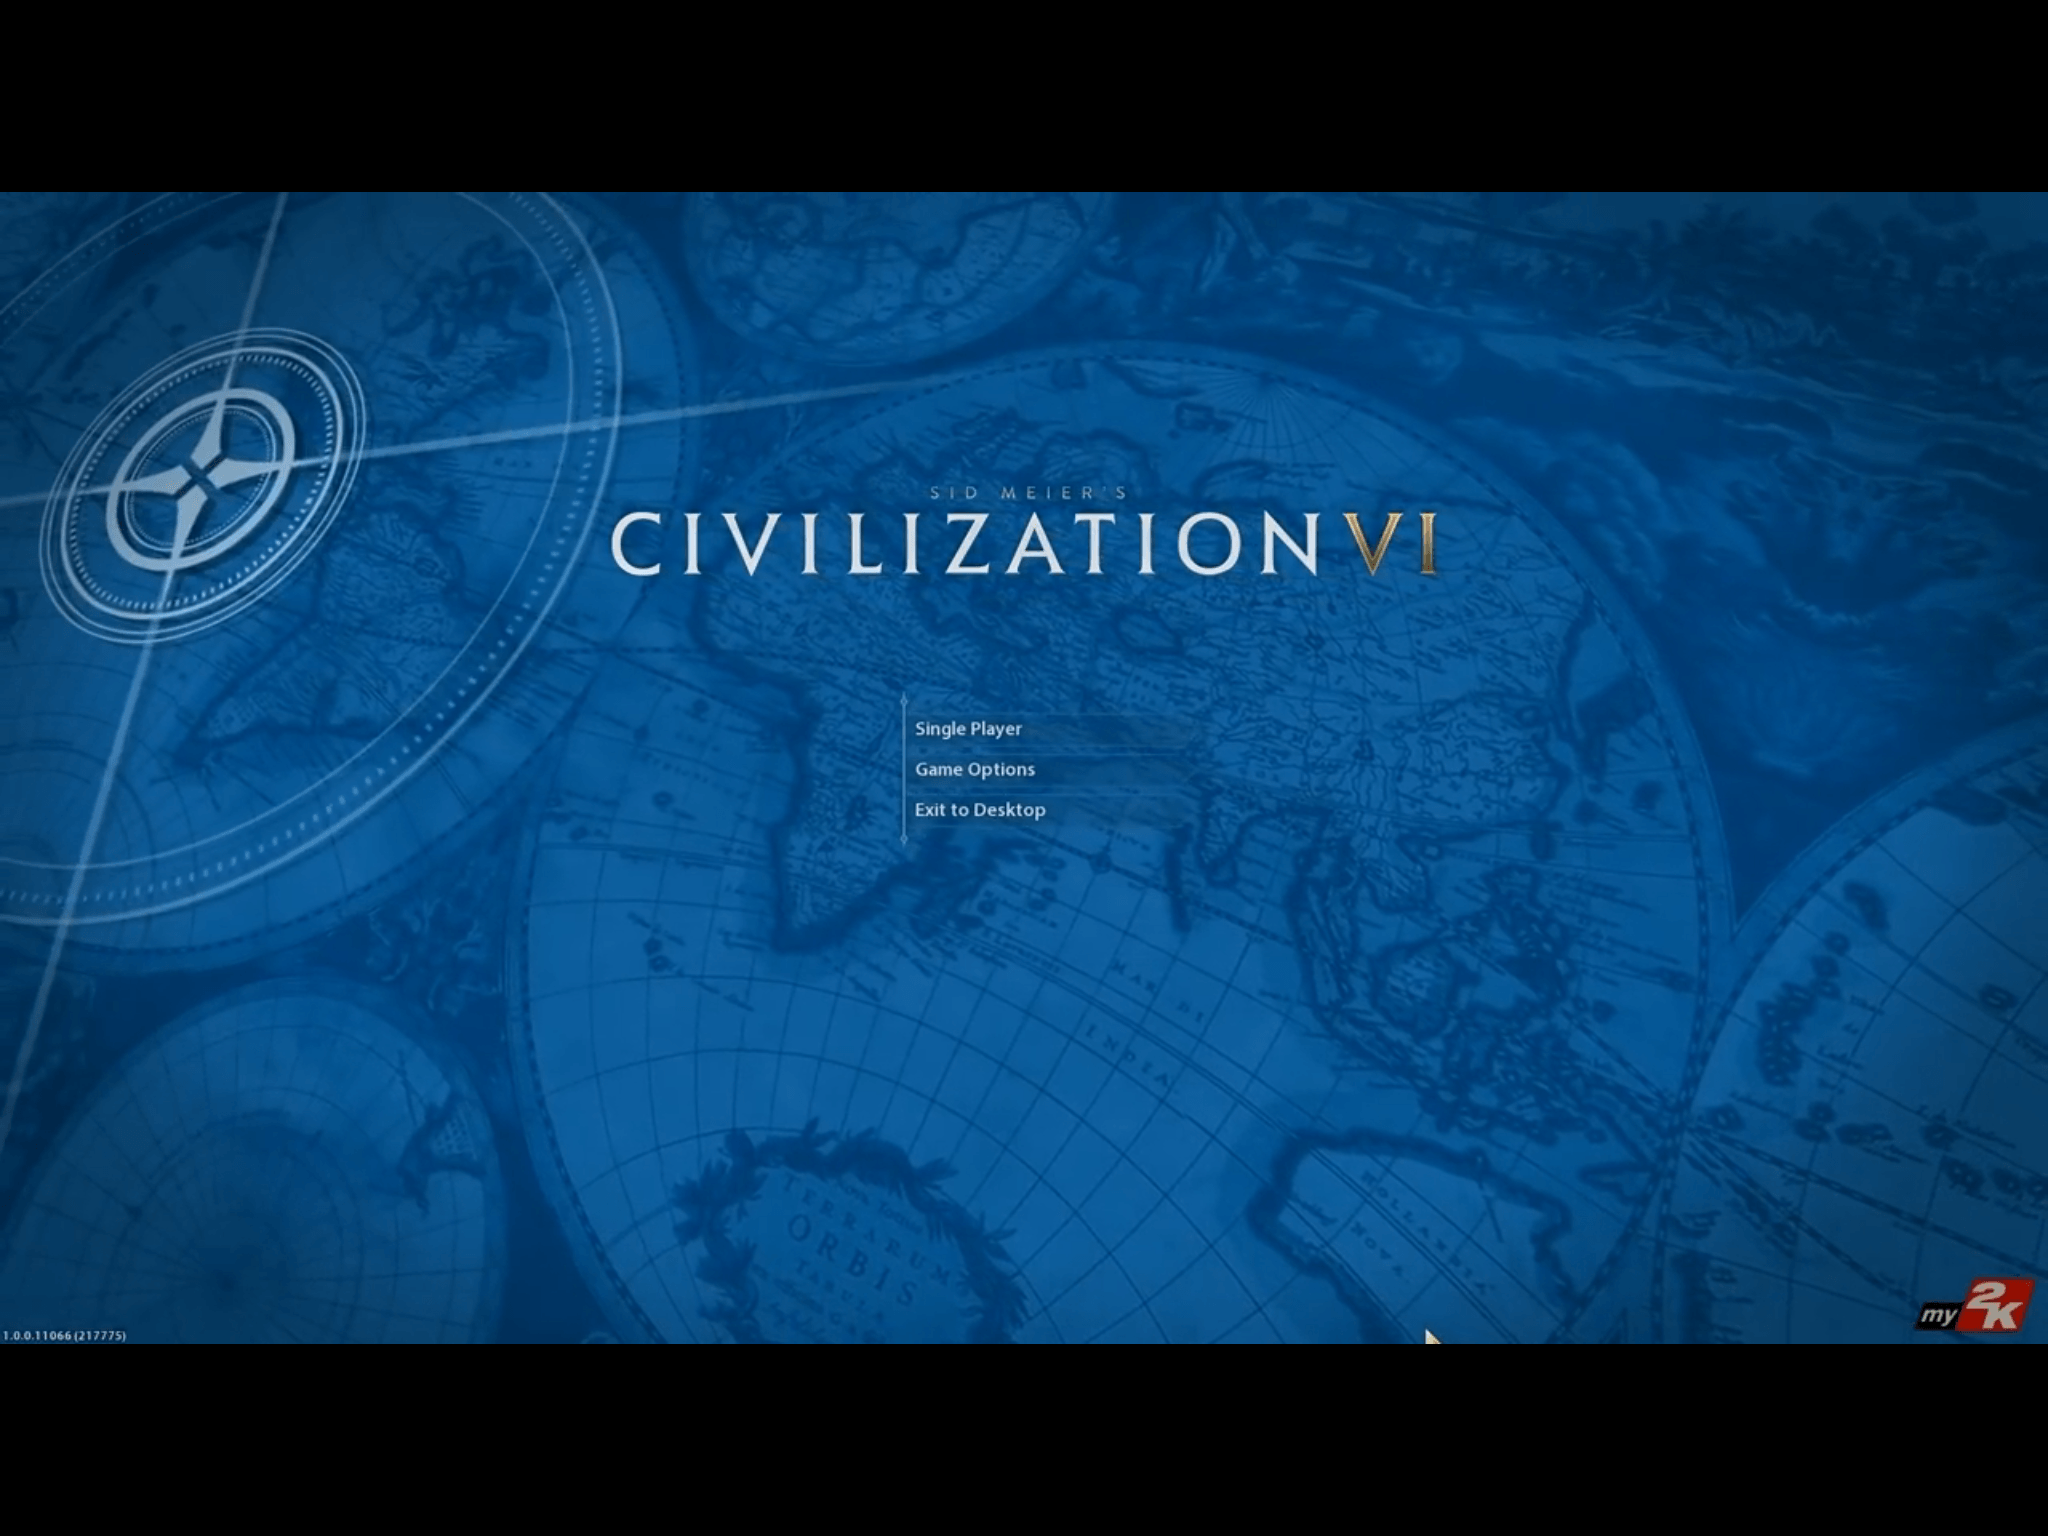 Does anyone have the clean loading screen wallpaper for Civ VI?